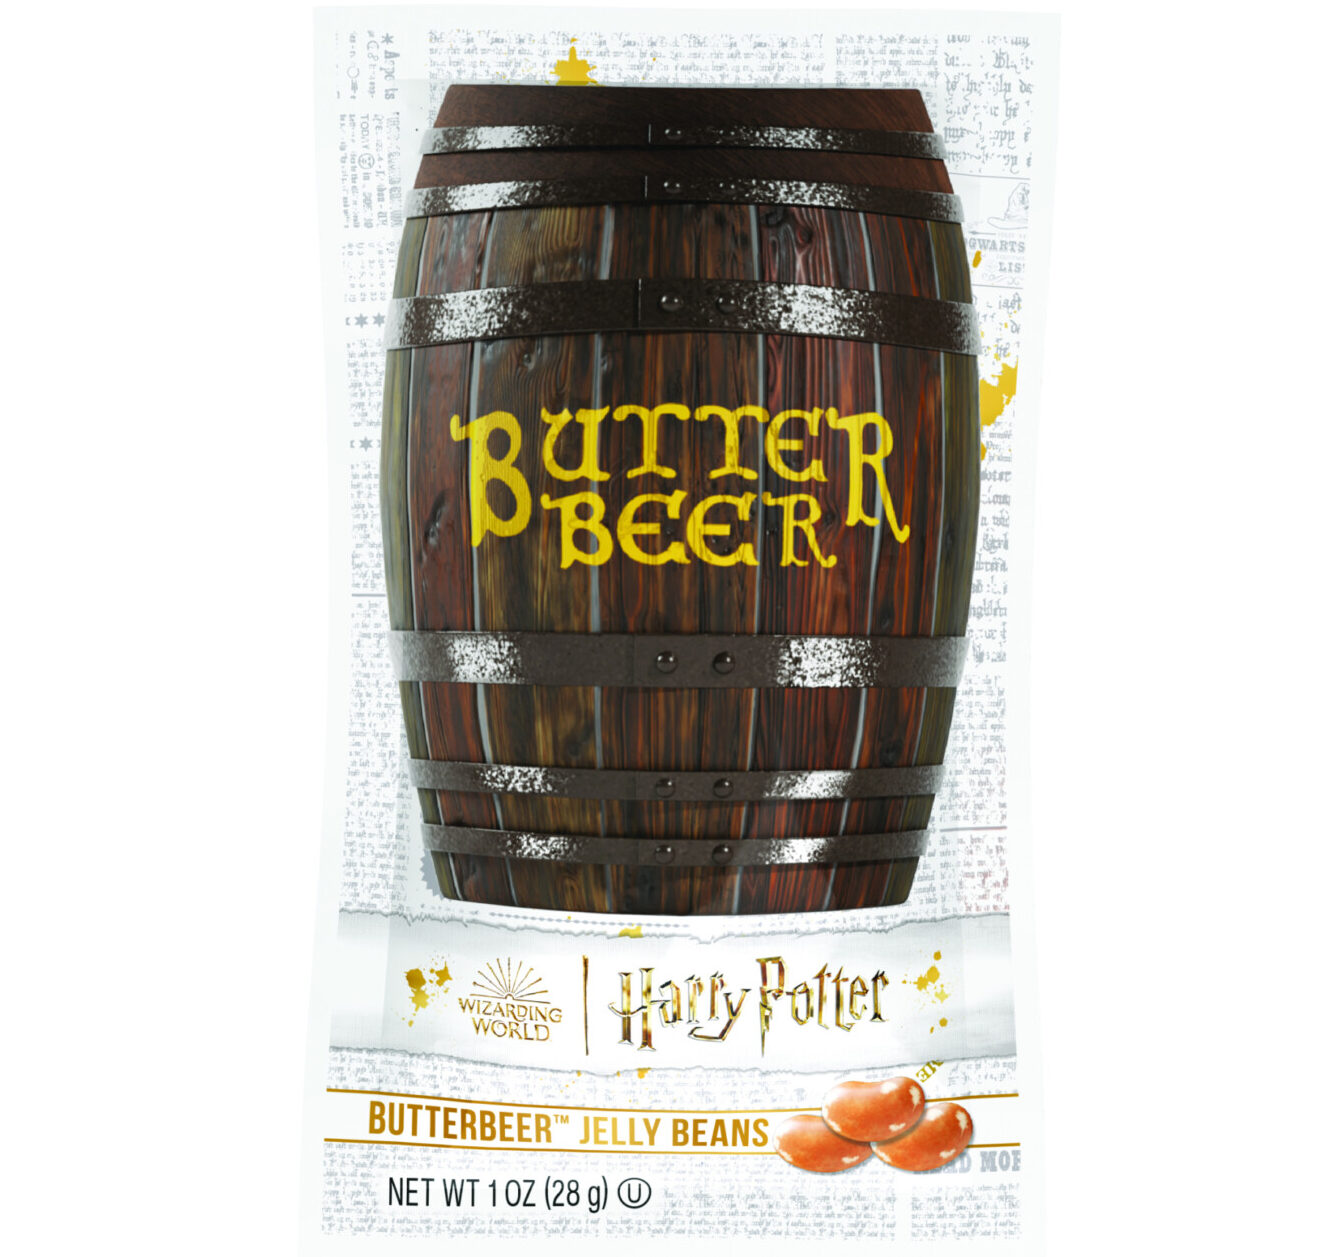 Barrel-shaped Butterbeer jelly beans container